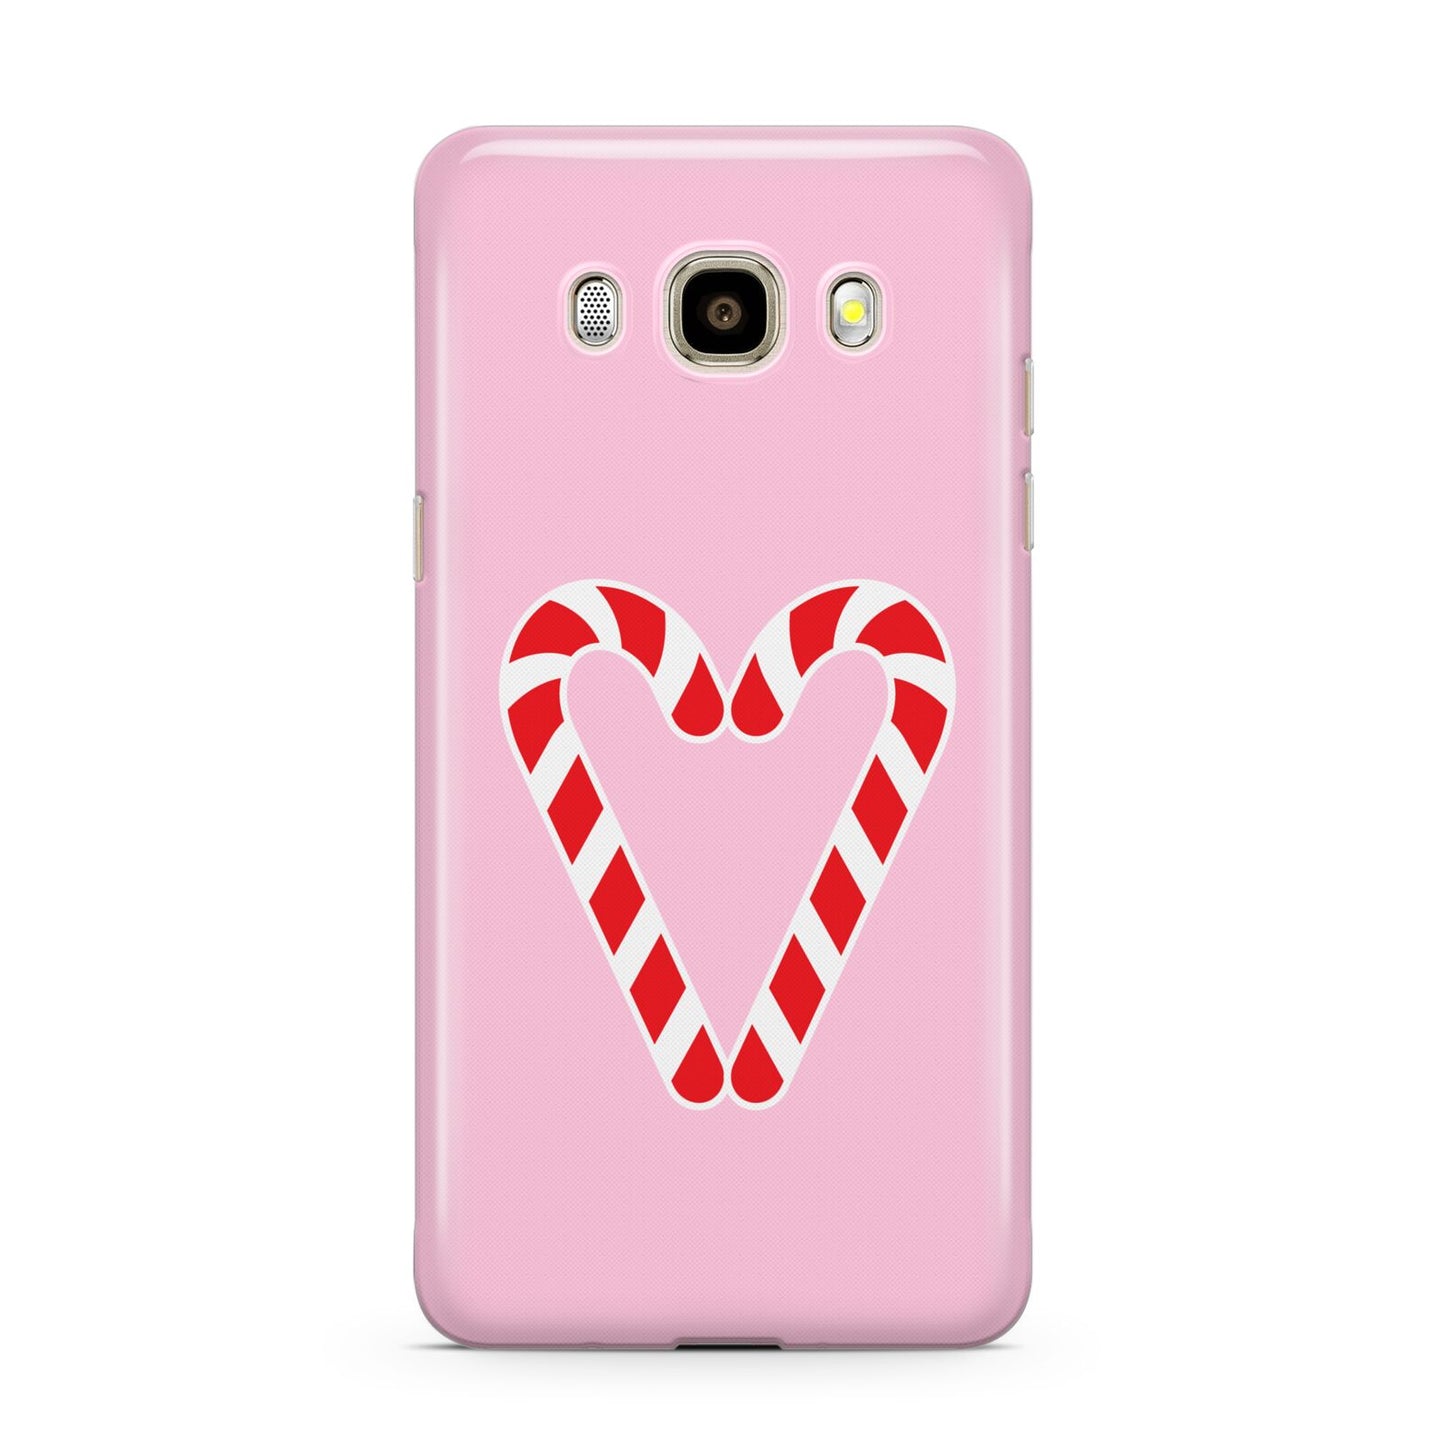 Candy Cane Heart Samsung Galaxy J7 2016 Case on gold phone